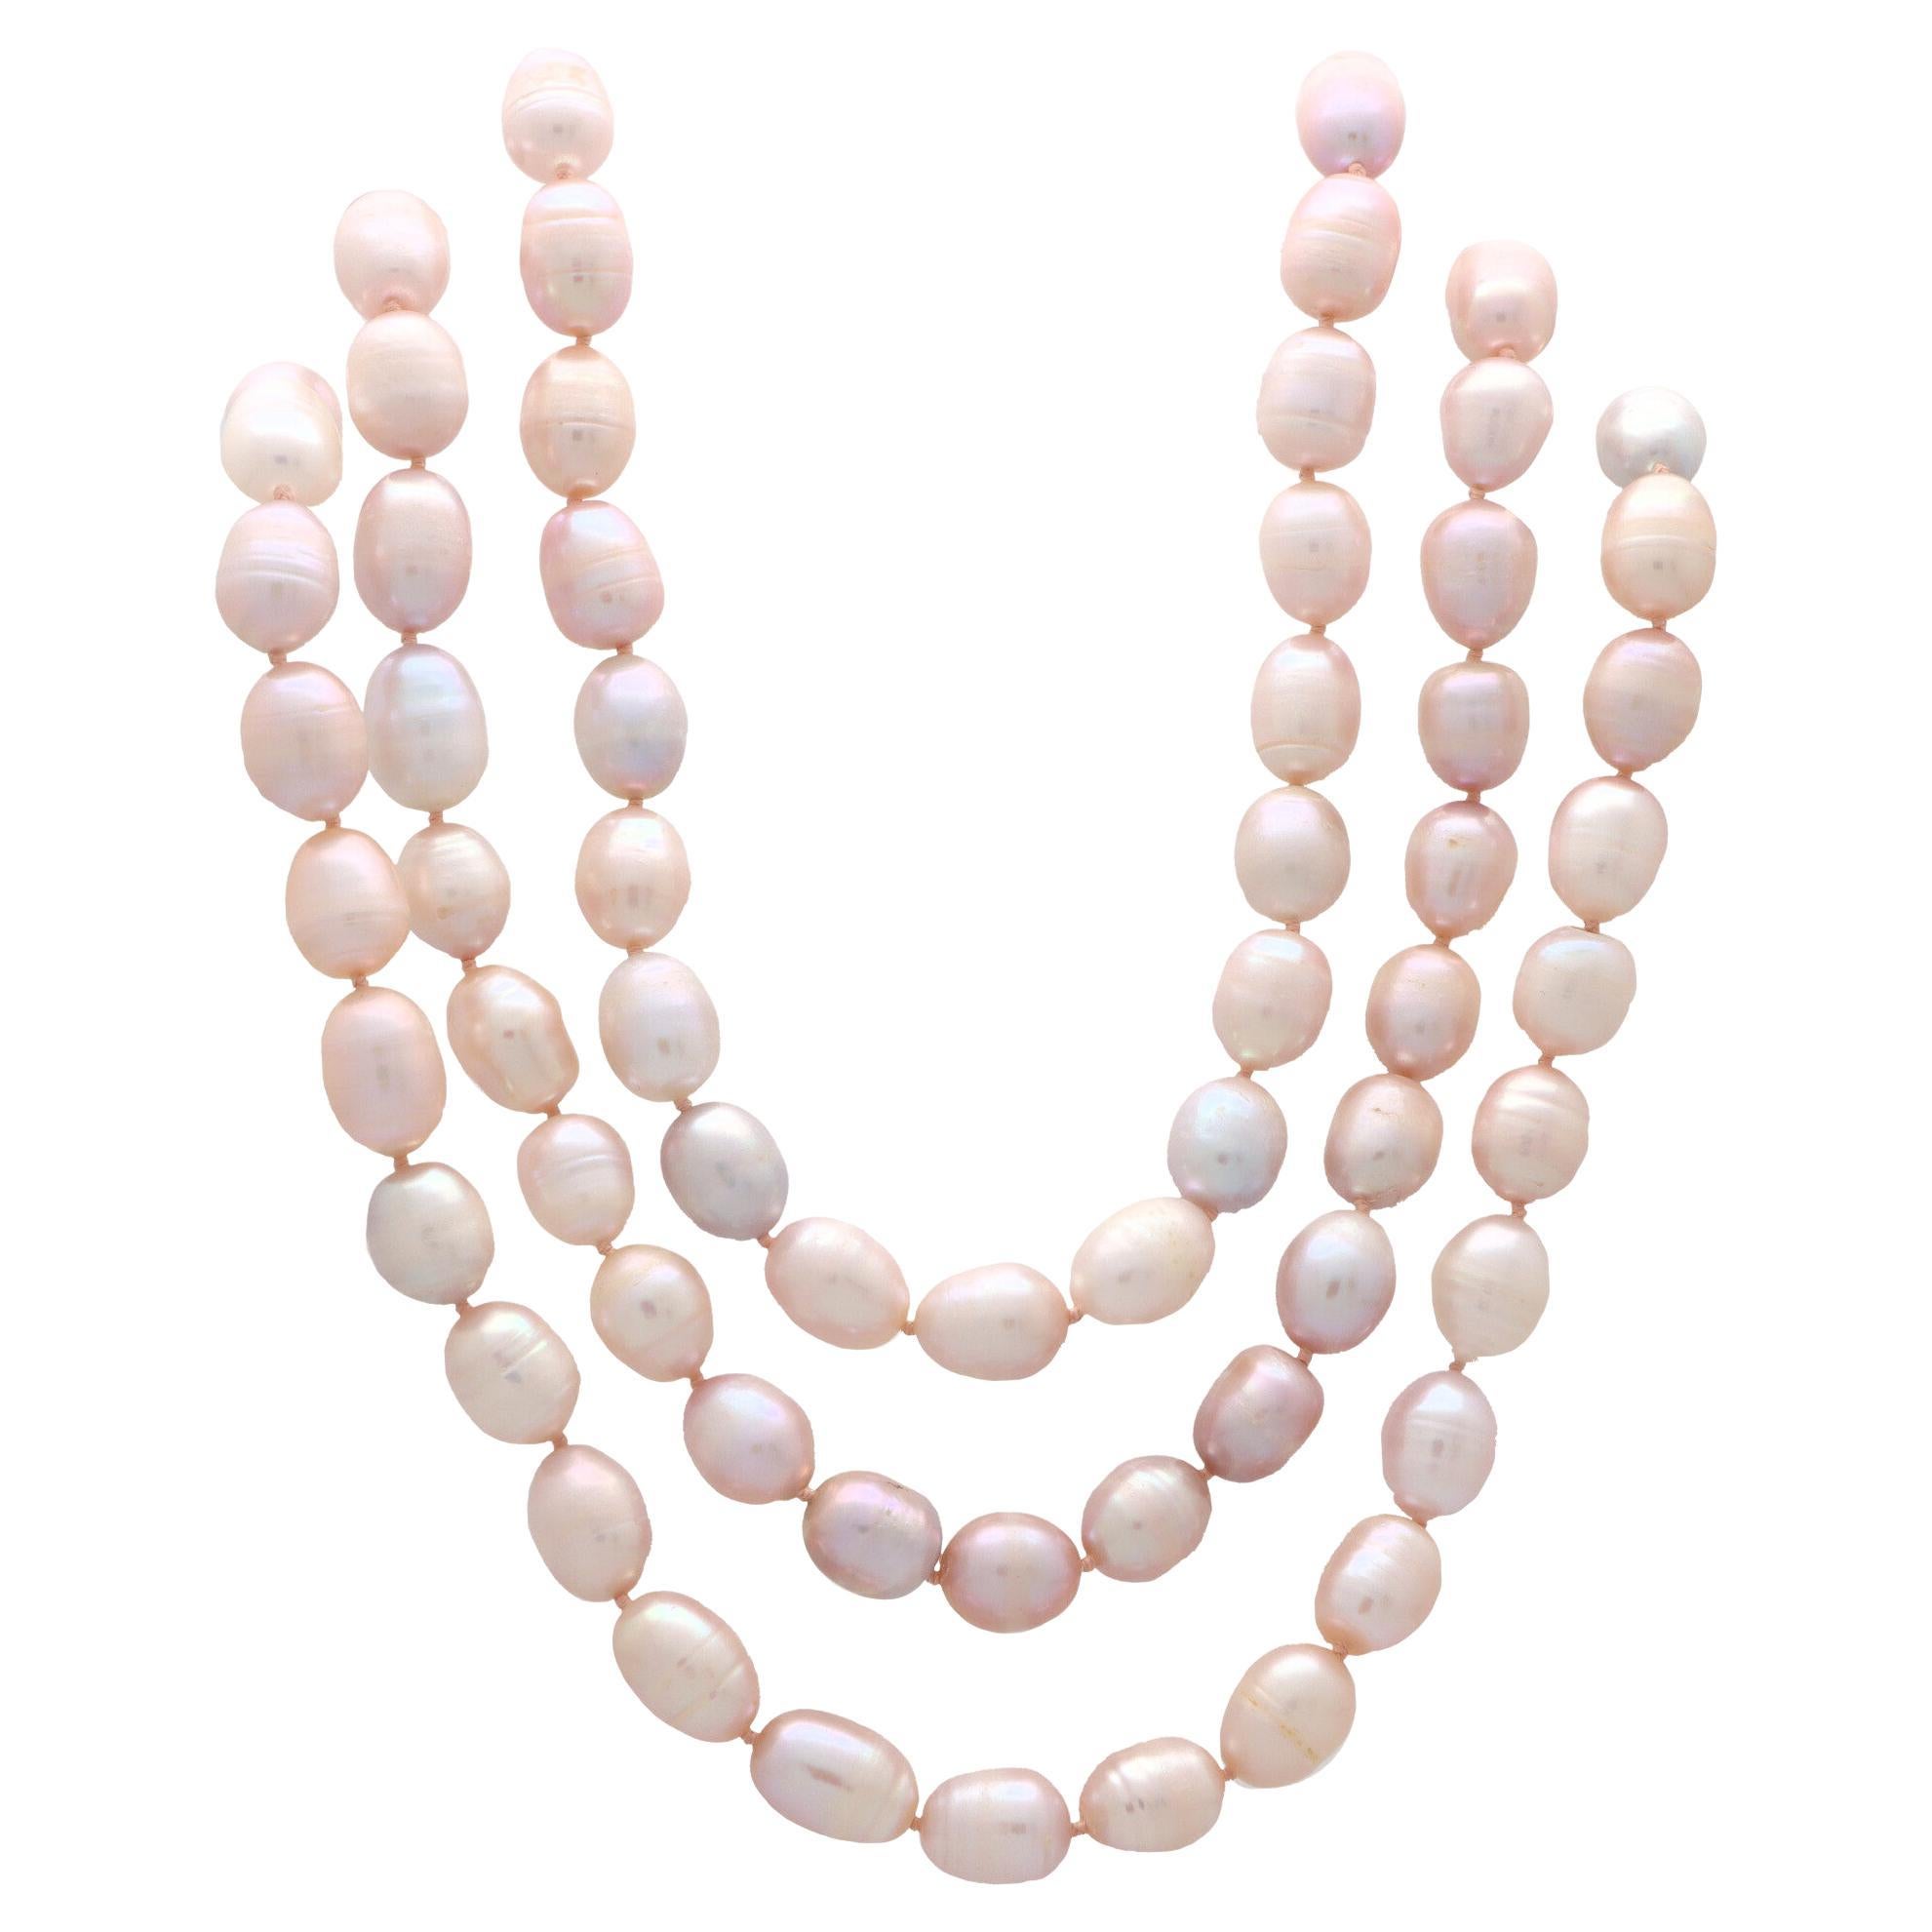 Half Twisted Necklace with 6mm Blush Pink Glass Pearls Three Strand 